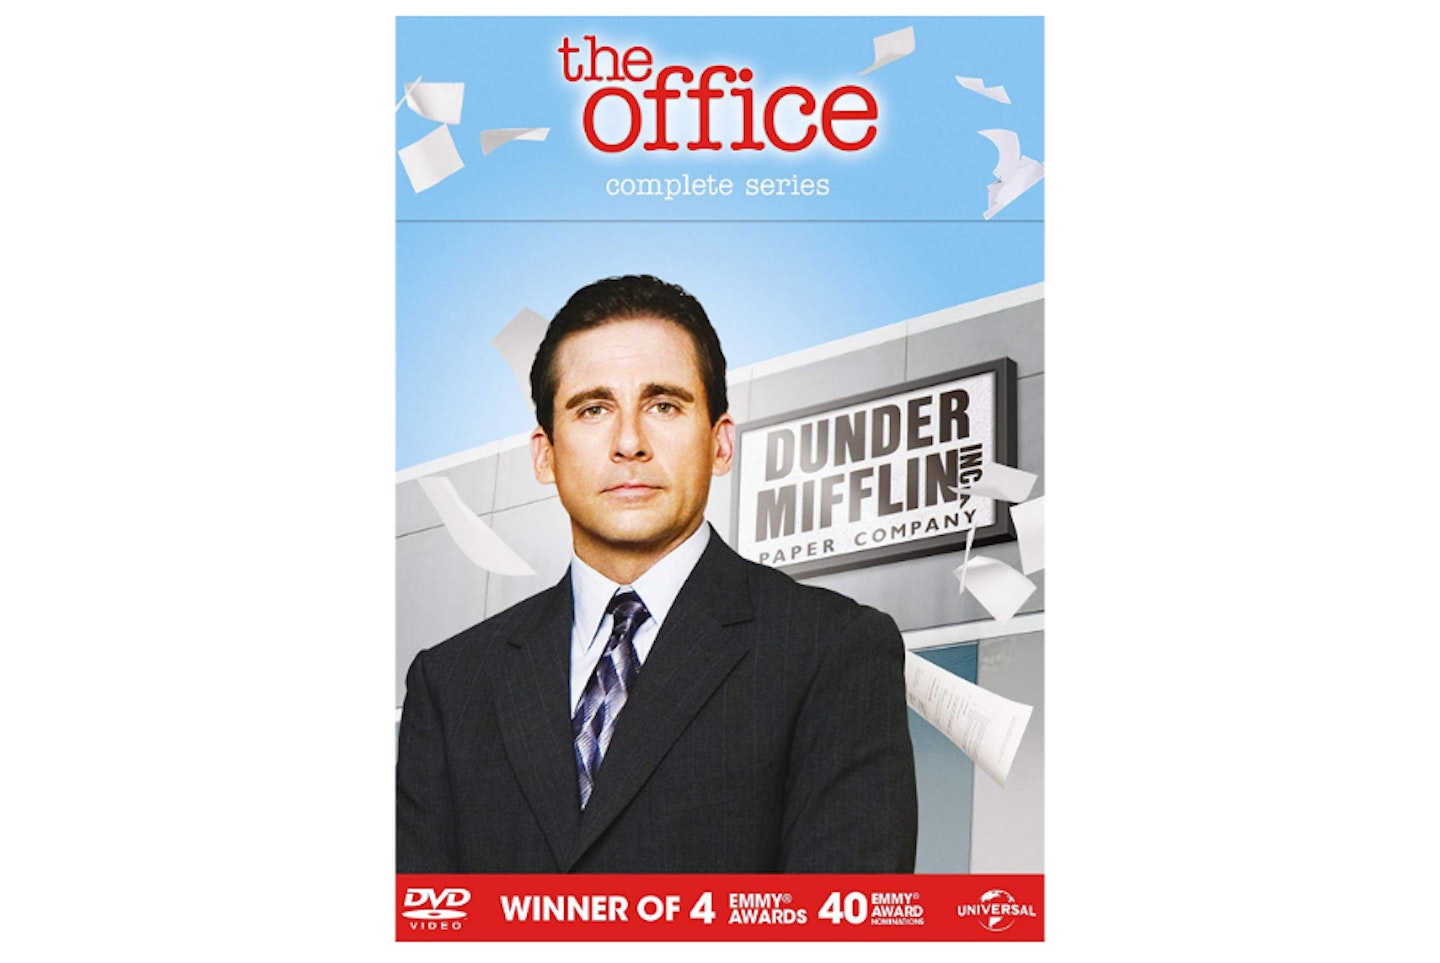 The Office: An American Workplace - Season 1-9 Complete